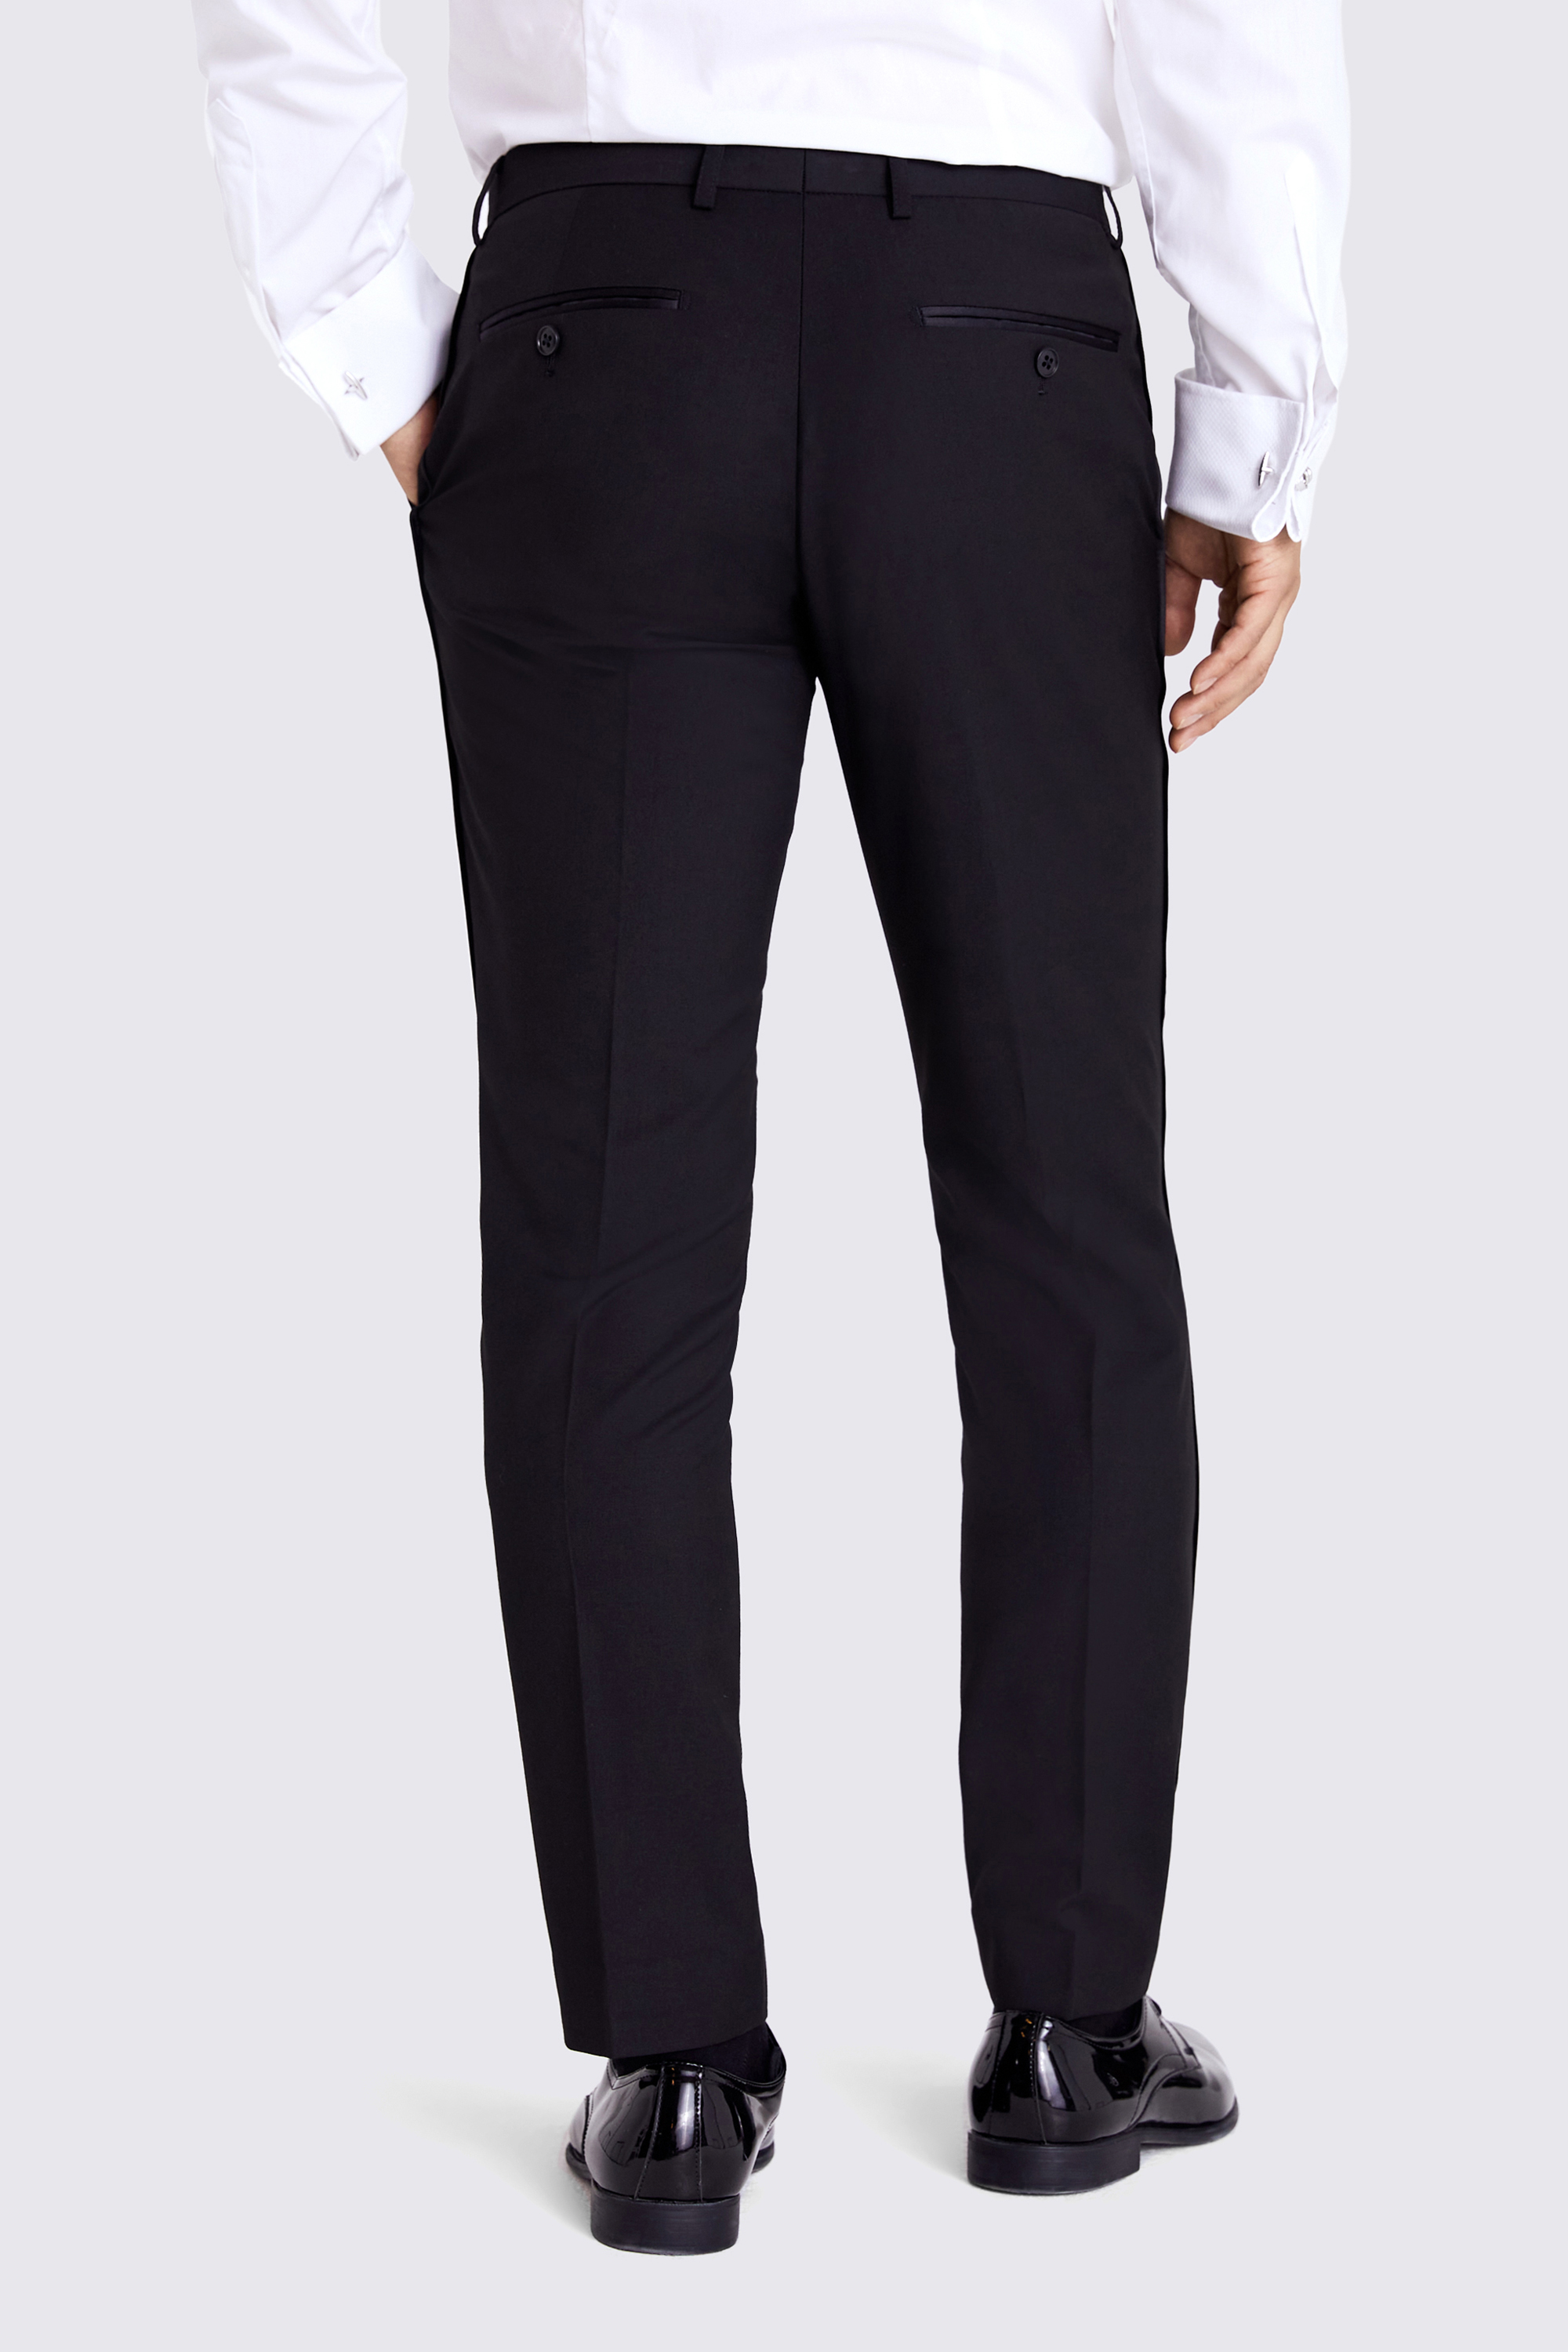 Slim Fit Black Dress Trousers | Buy Online at Moss